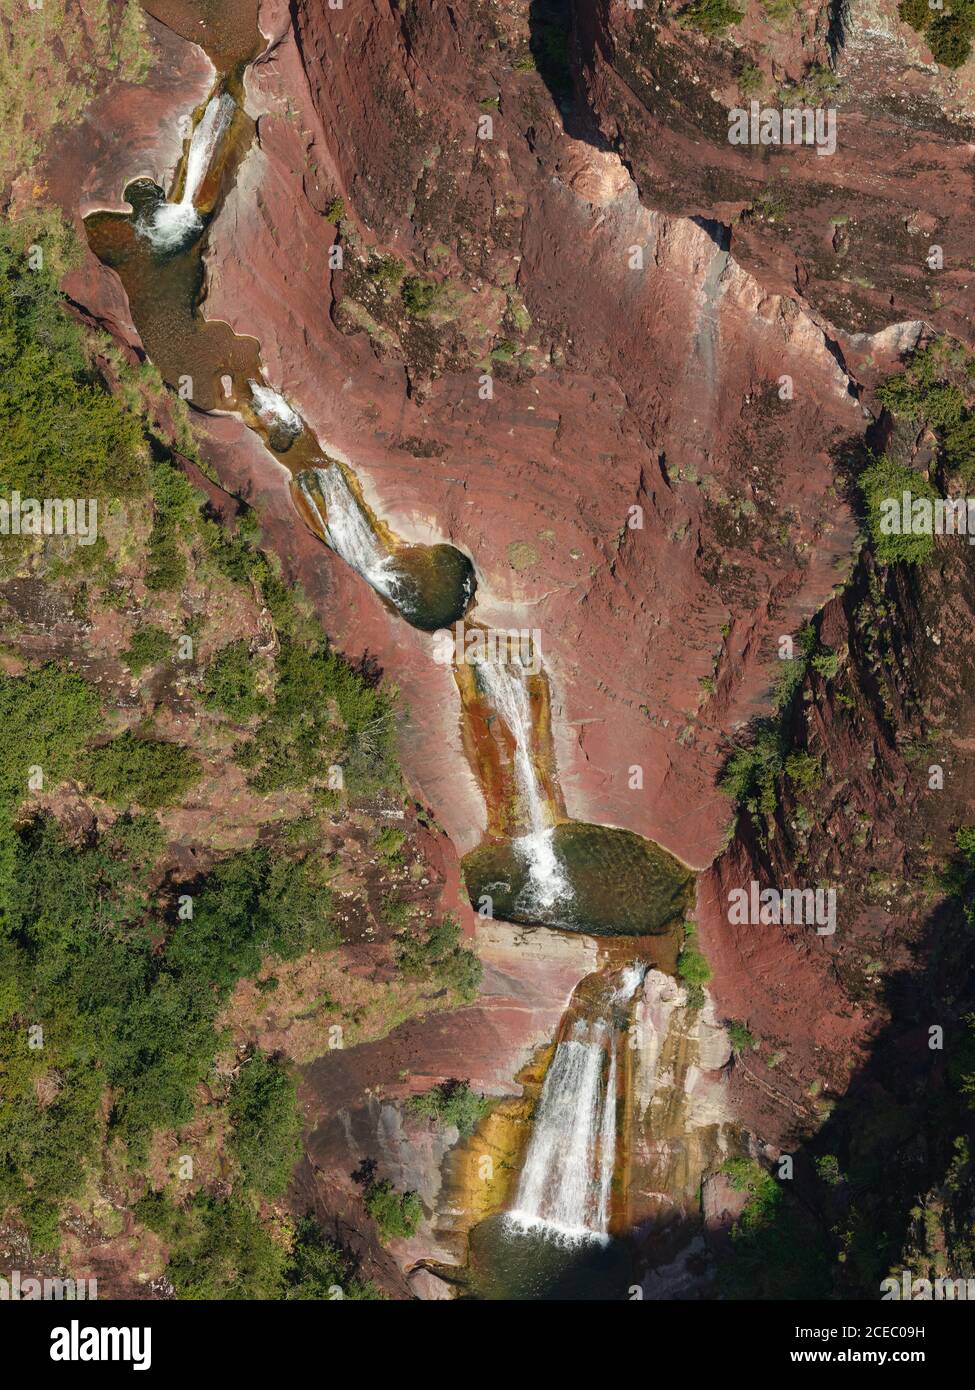 AERIAL VIEW. Multi-step waterfall with plunge pools in a landscape of red pelites. Vallon de Challandre, Beuil, Alpes-Maritimes, France. Stock Photo